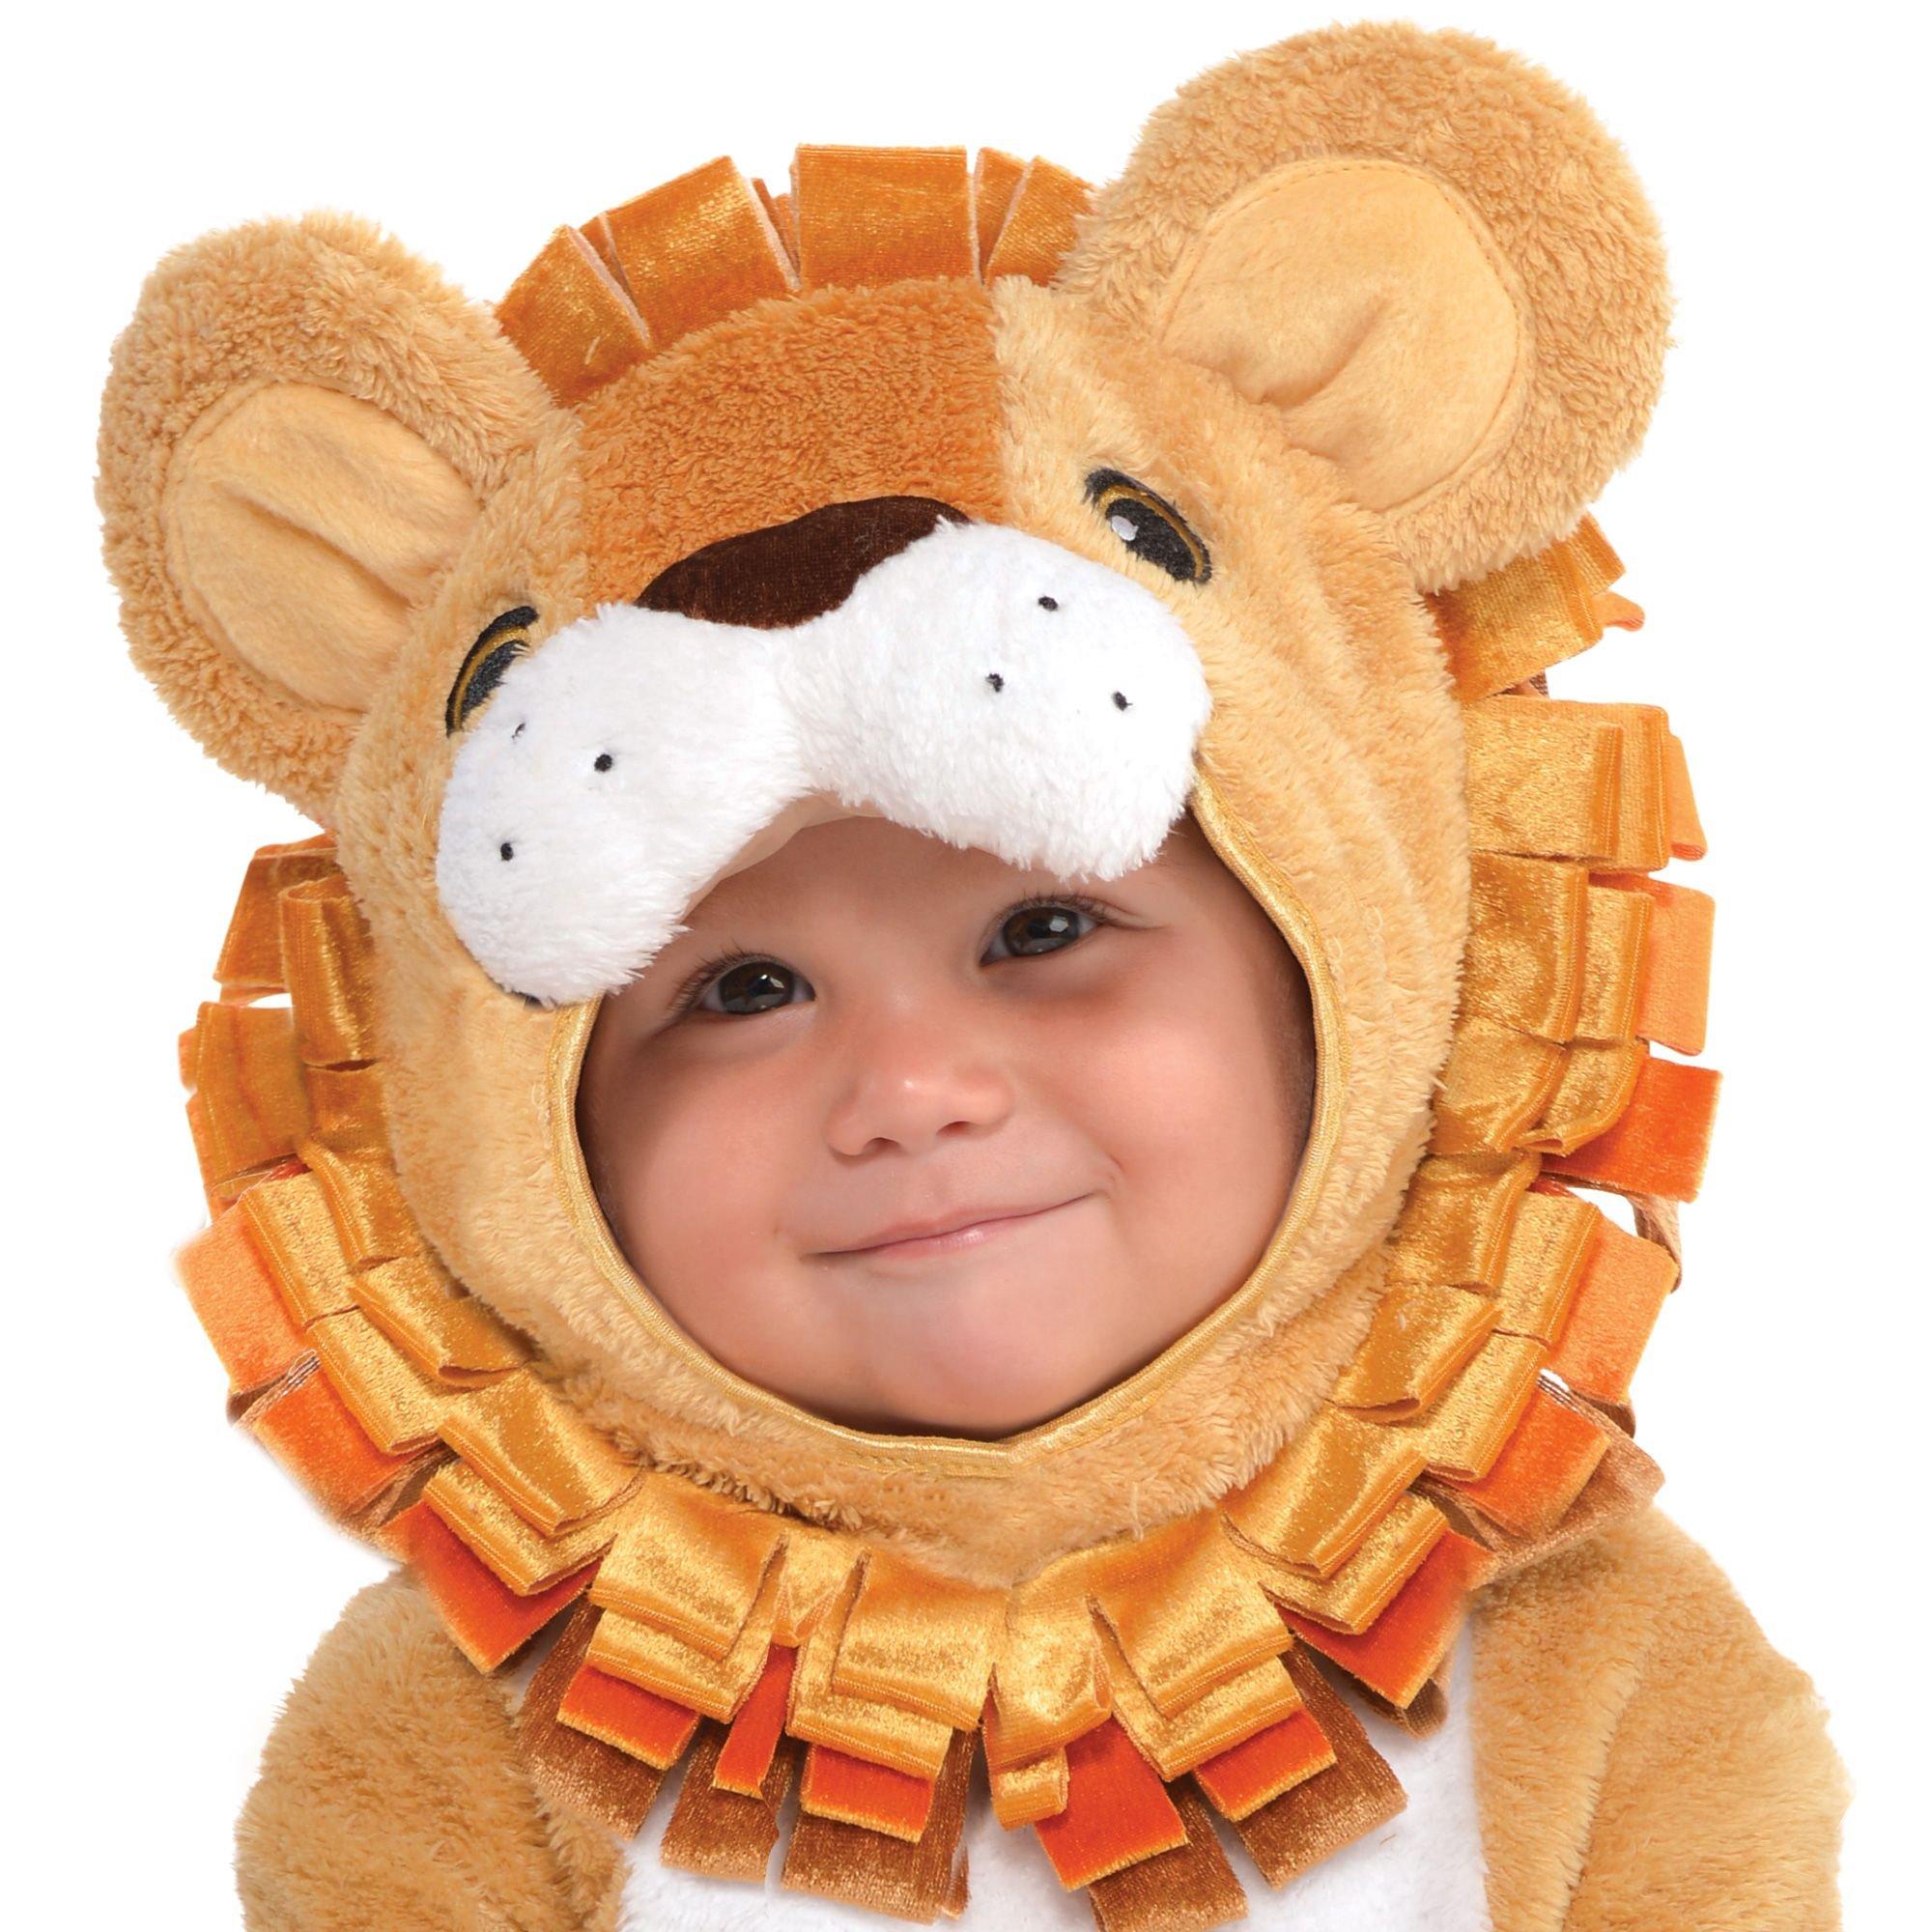 Baby Cowardly Lion Costume